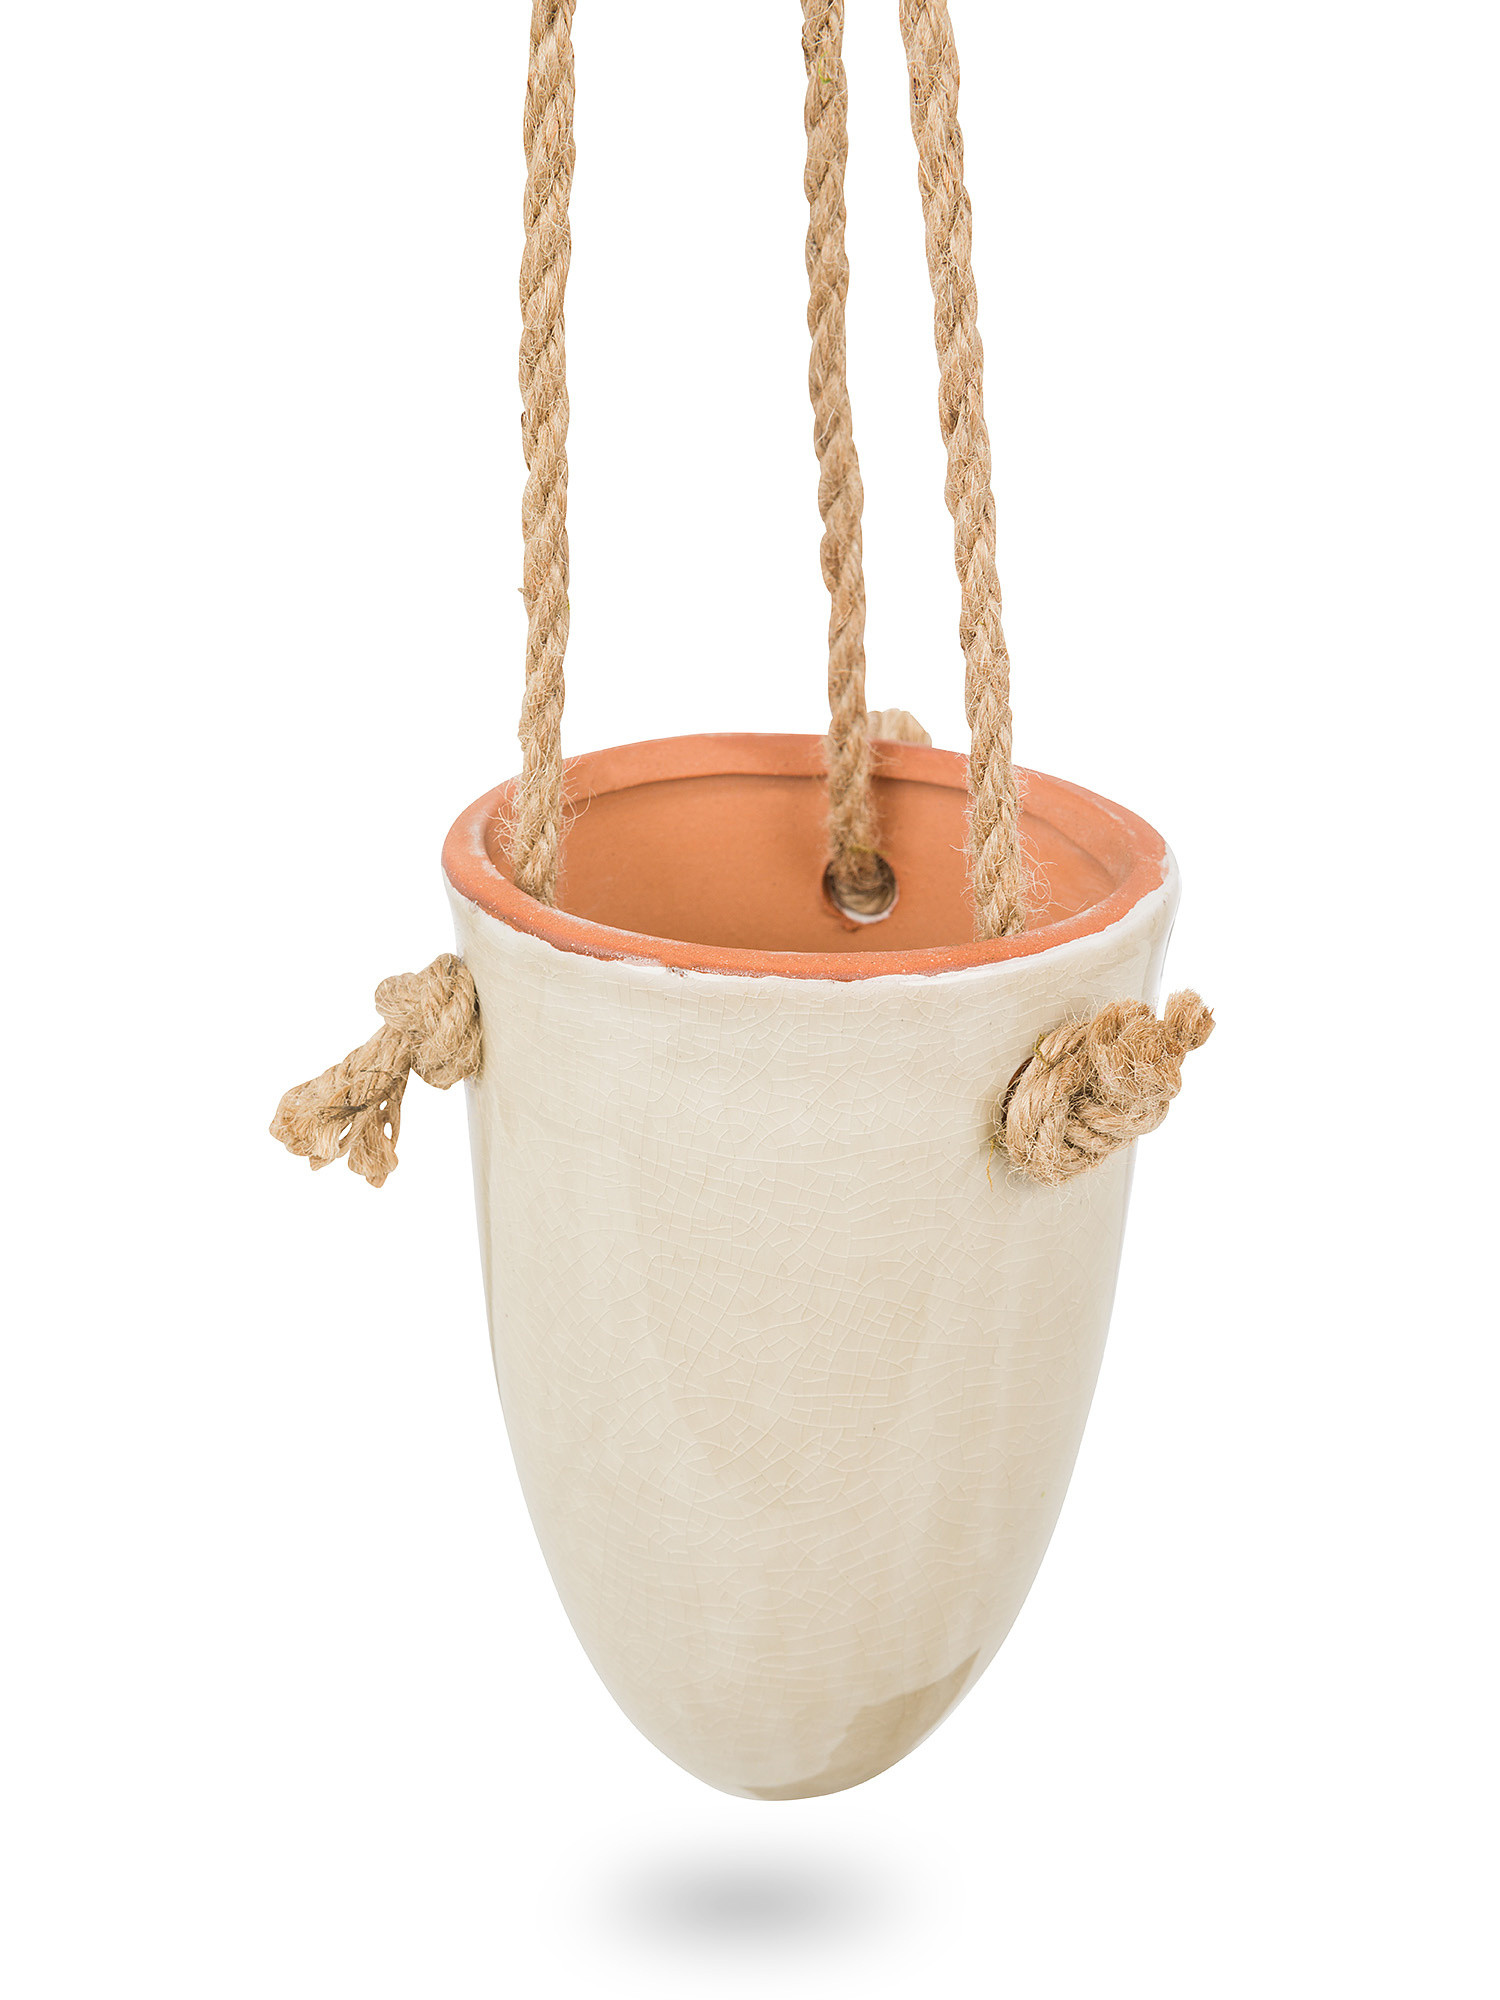 Ceramic cachepot with rope, Beige, large image number 1